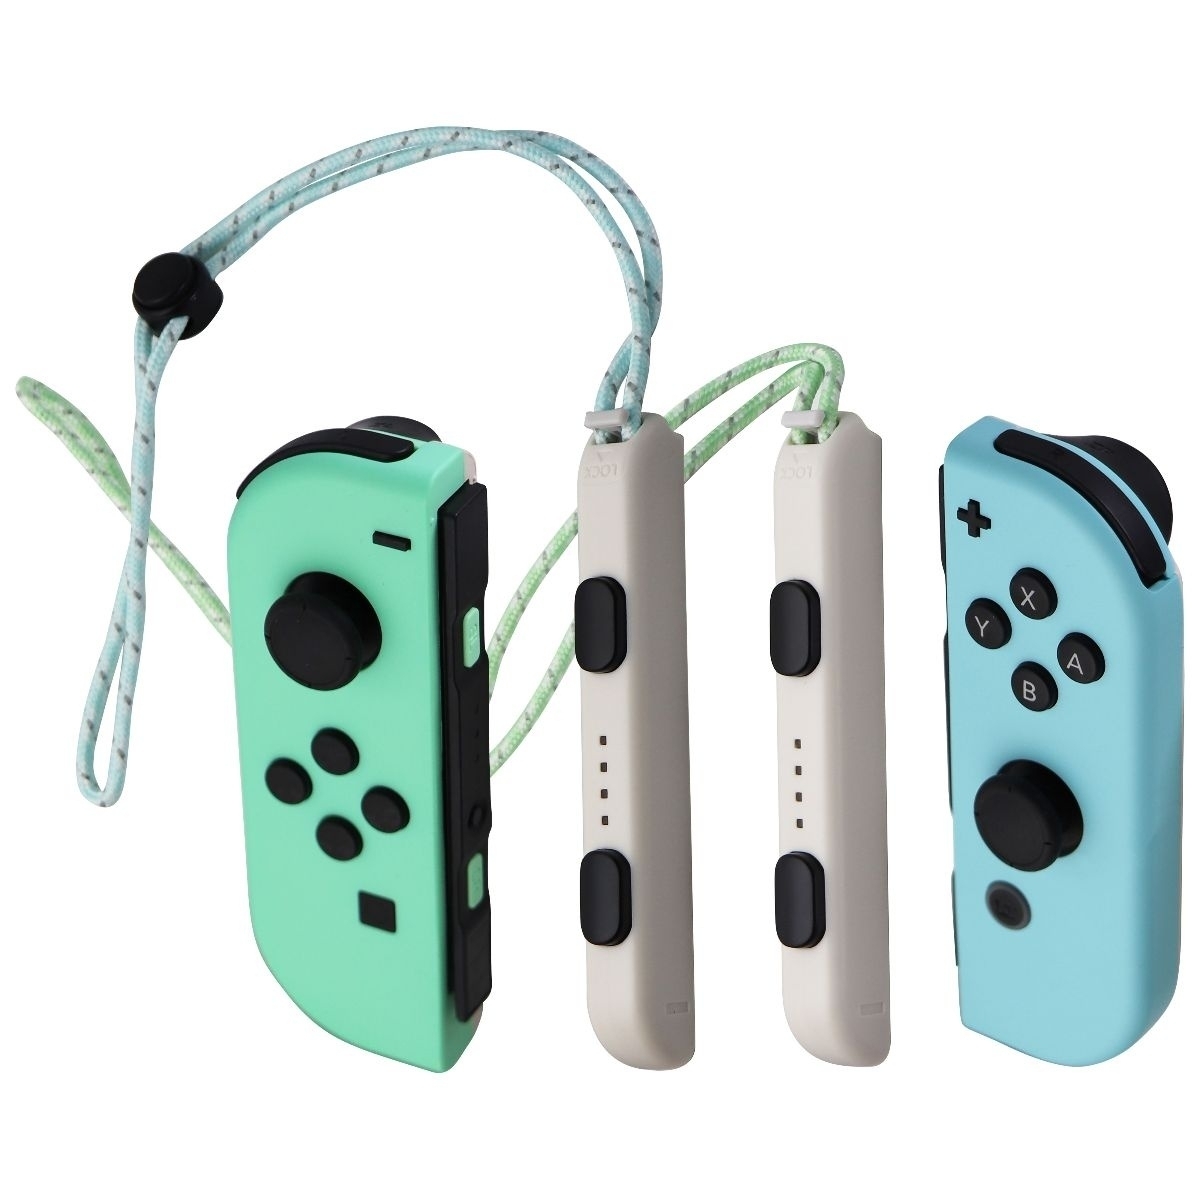 Nintendo Animal Crossing Edition Left & Right Joy-Cons With Straps - Blue/Green